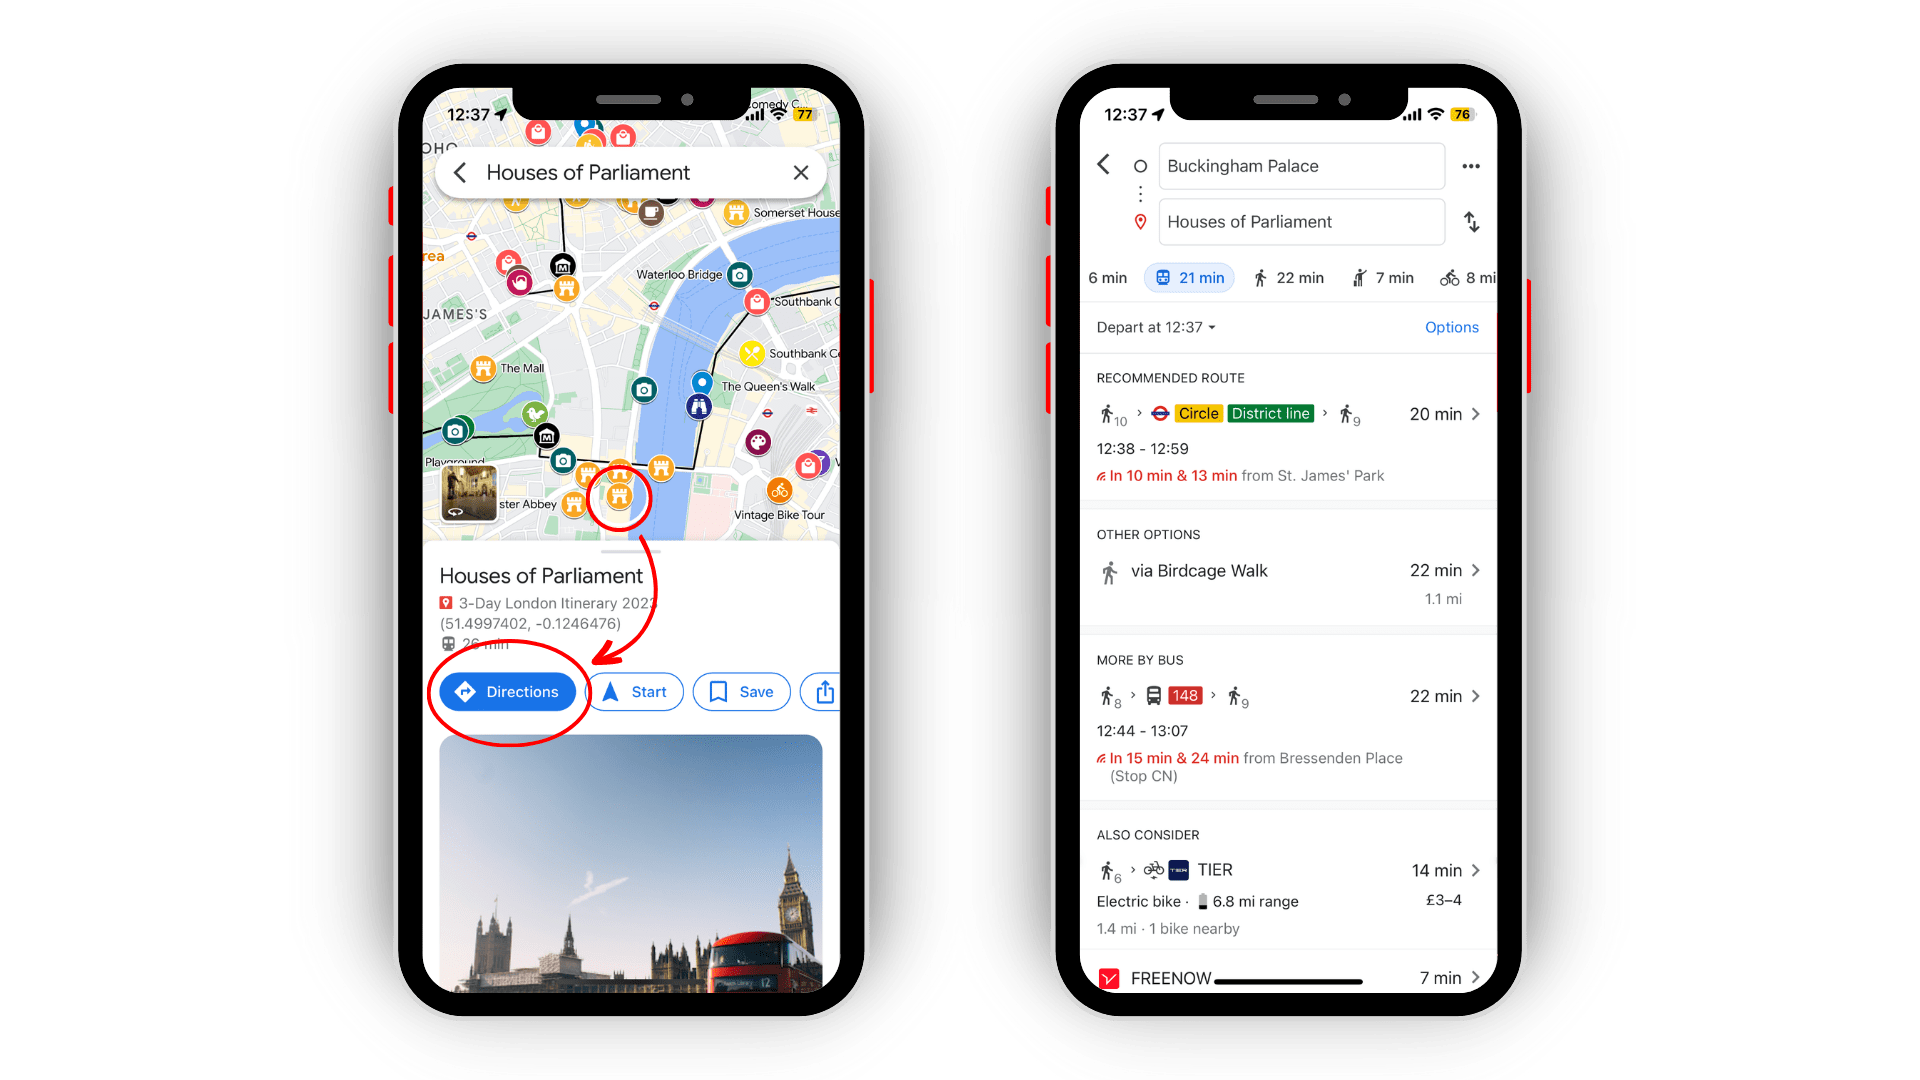 Two phones are pictured side by side to demonstrate how you can easily get directions to your next stop. Just click on a pin, then 'directions' and choose one of the options available.